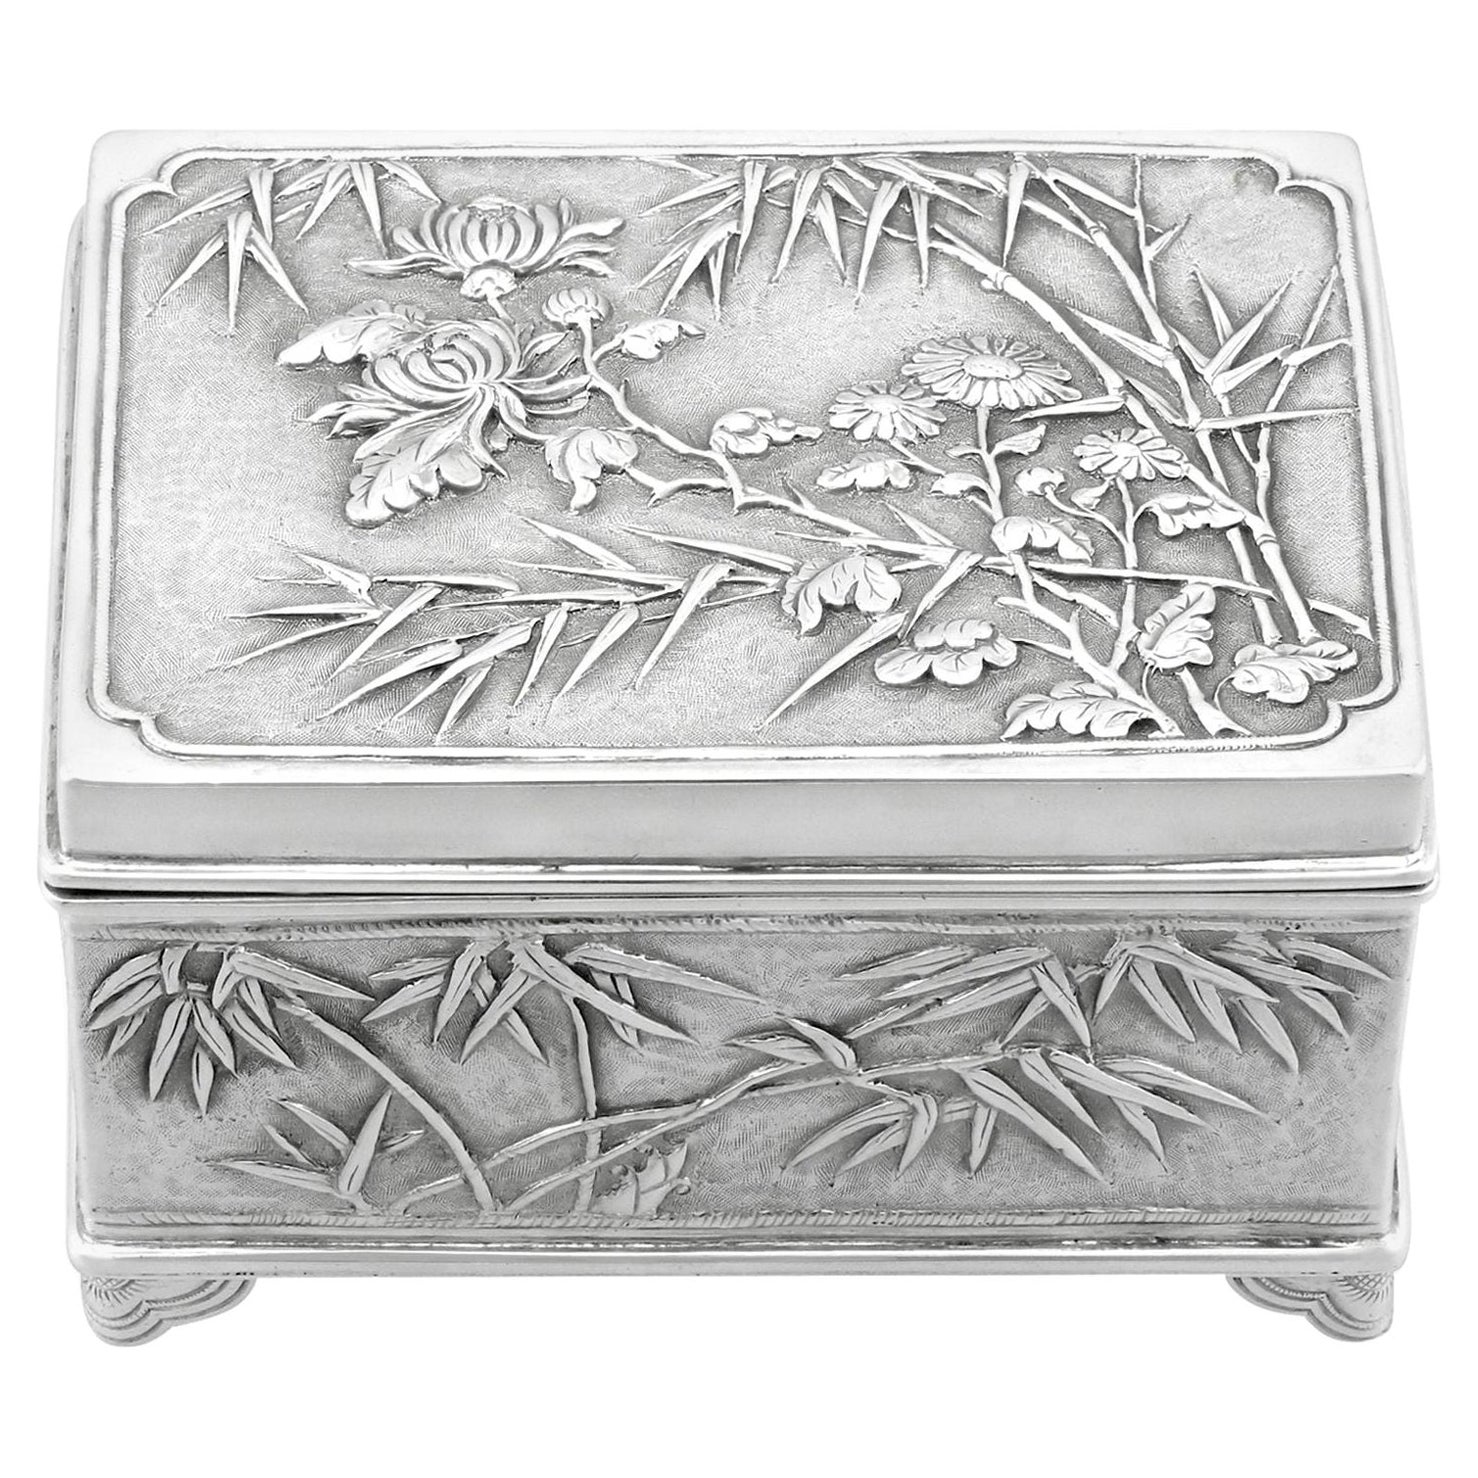 1900s Antique Chinese Export Silver Box For Sale